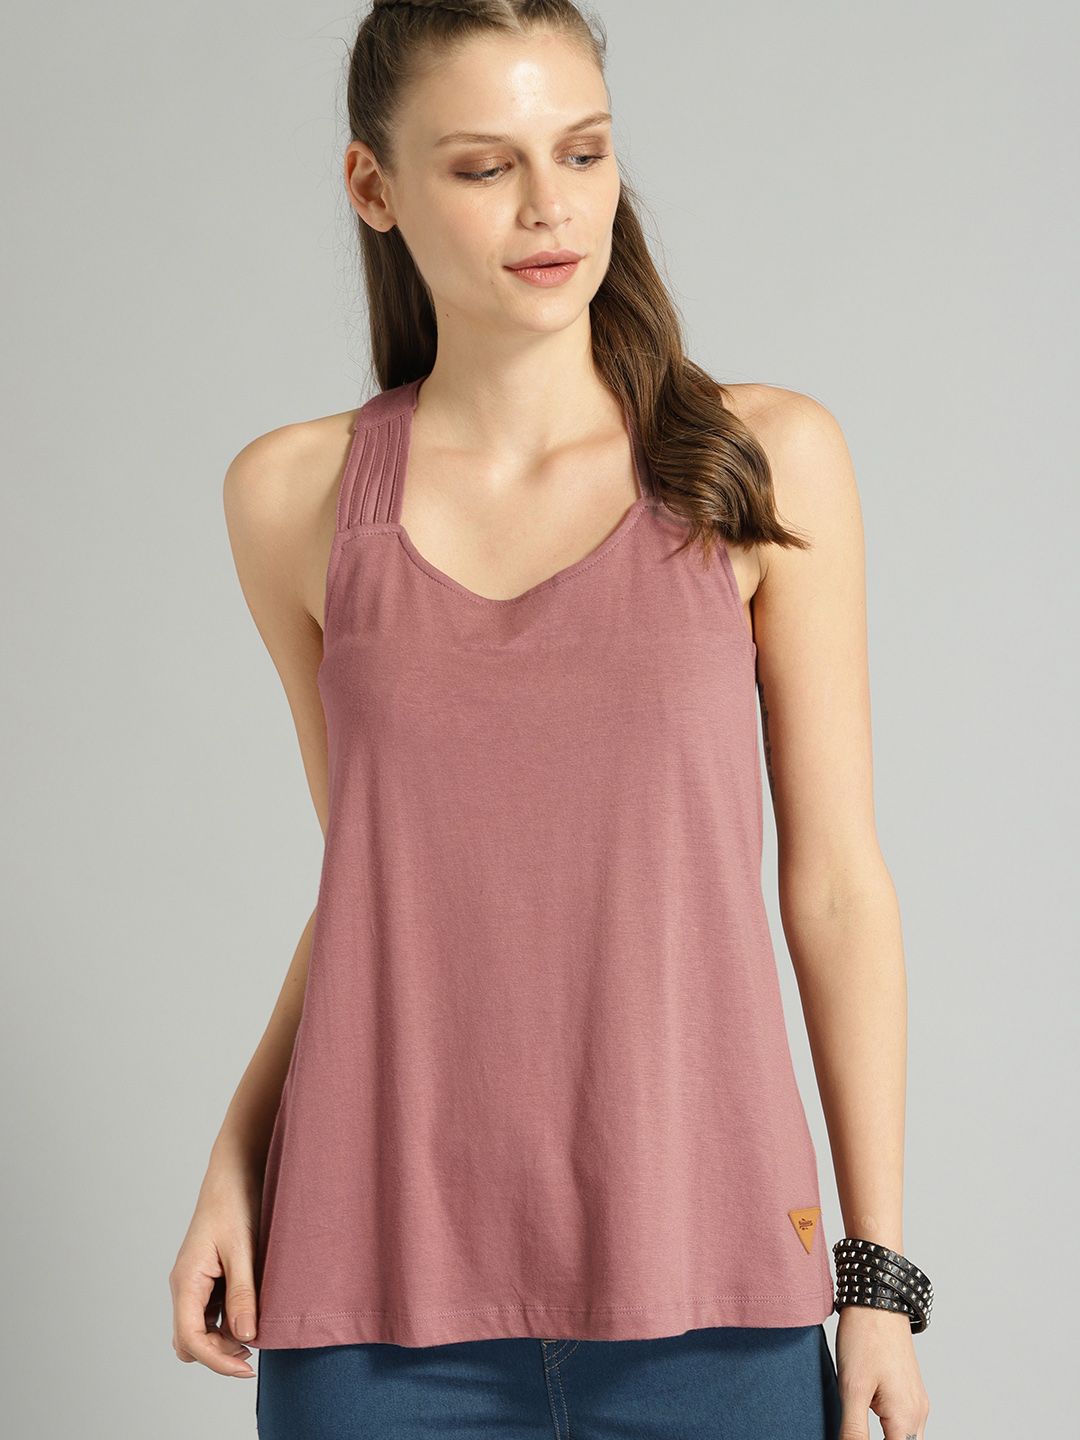 Roadster Women Peach-Coloured Solid Tank Top Price in India